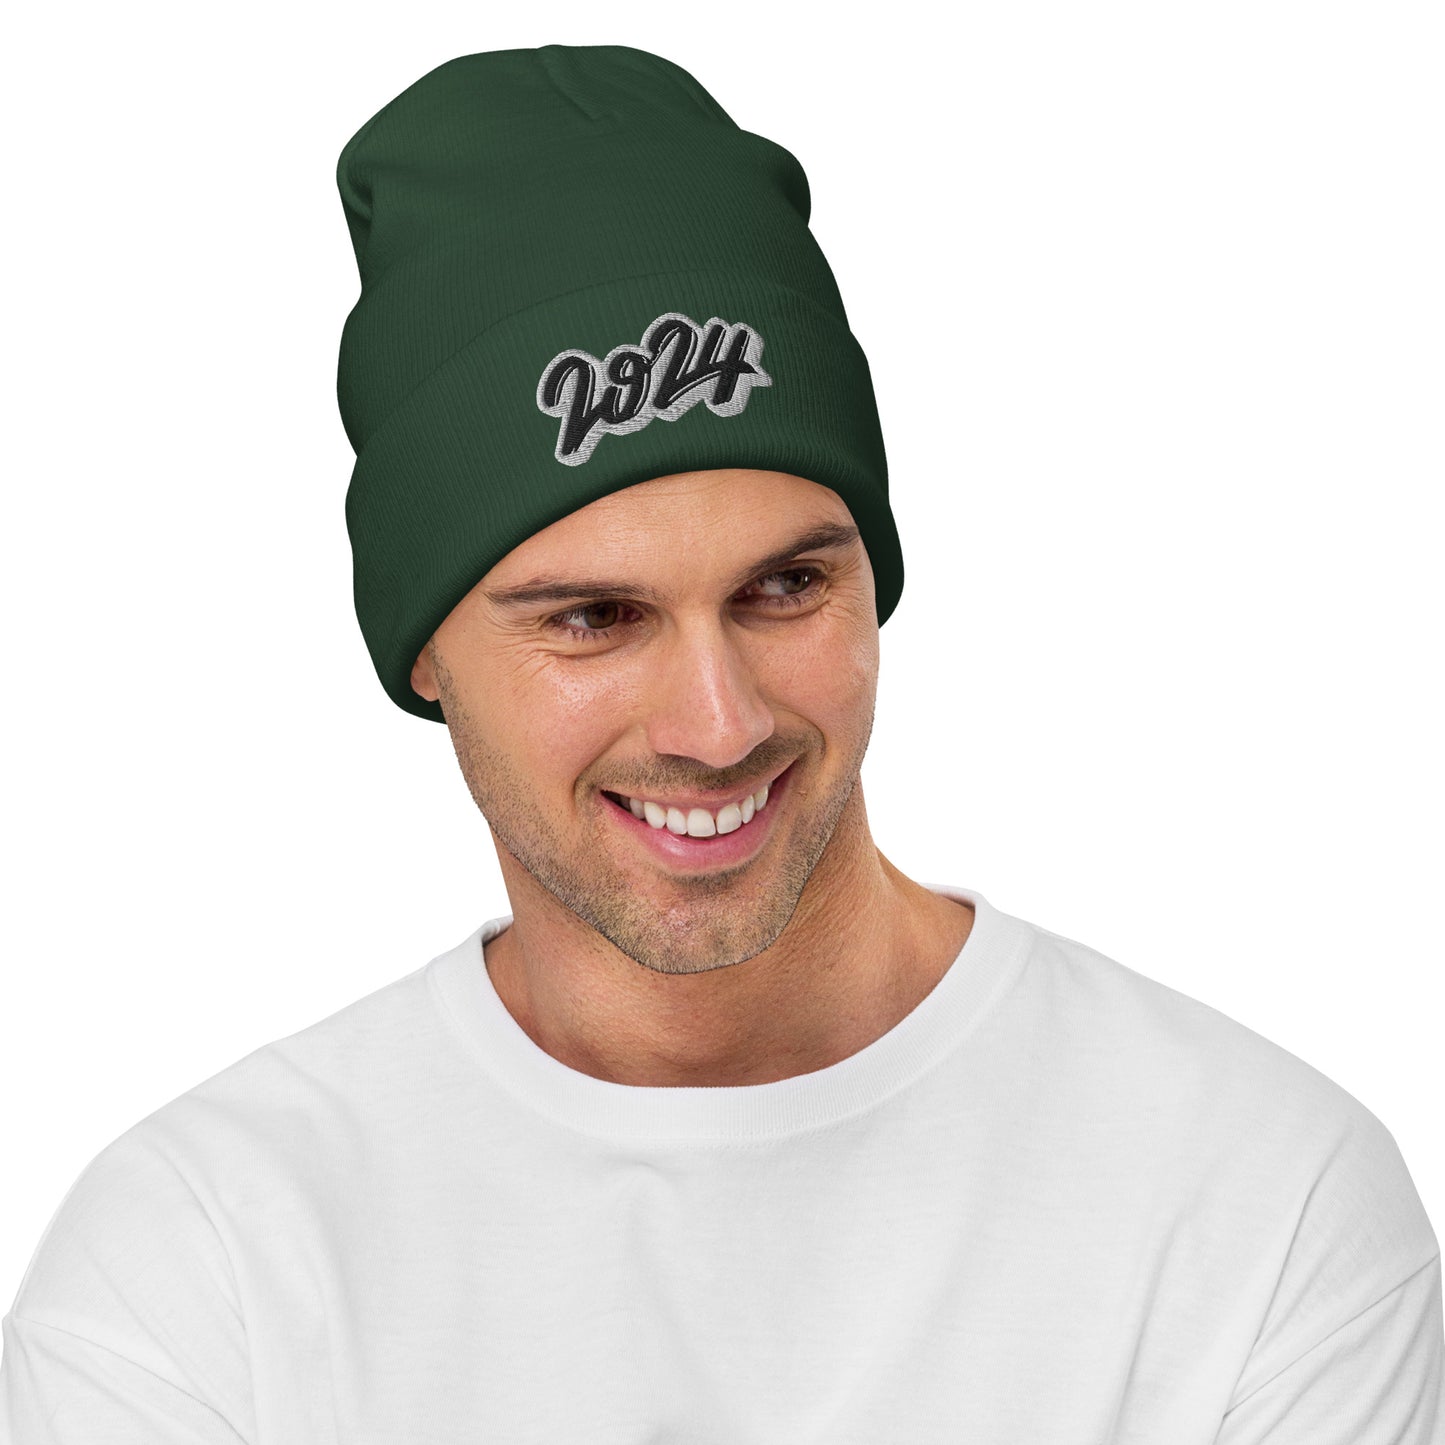 2024 Embroidered Beanie